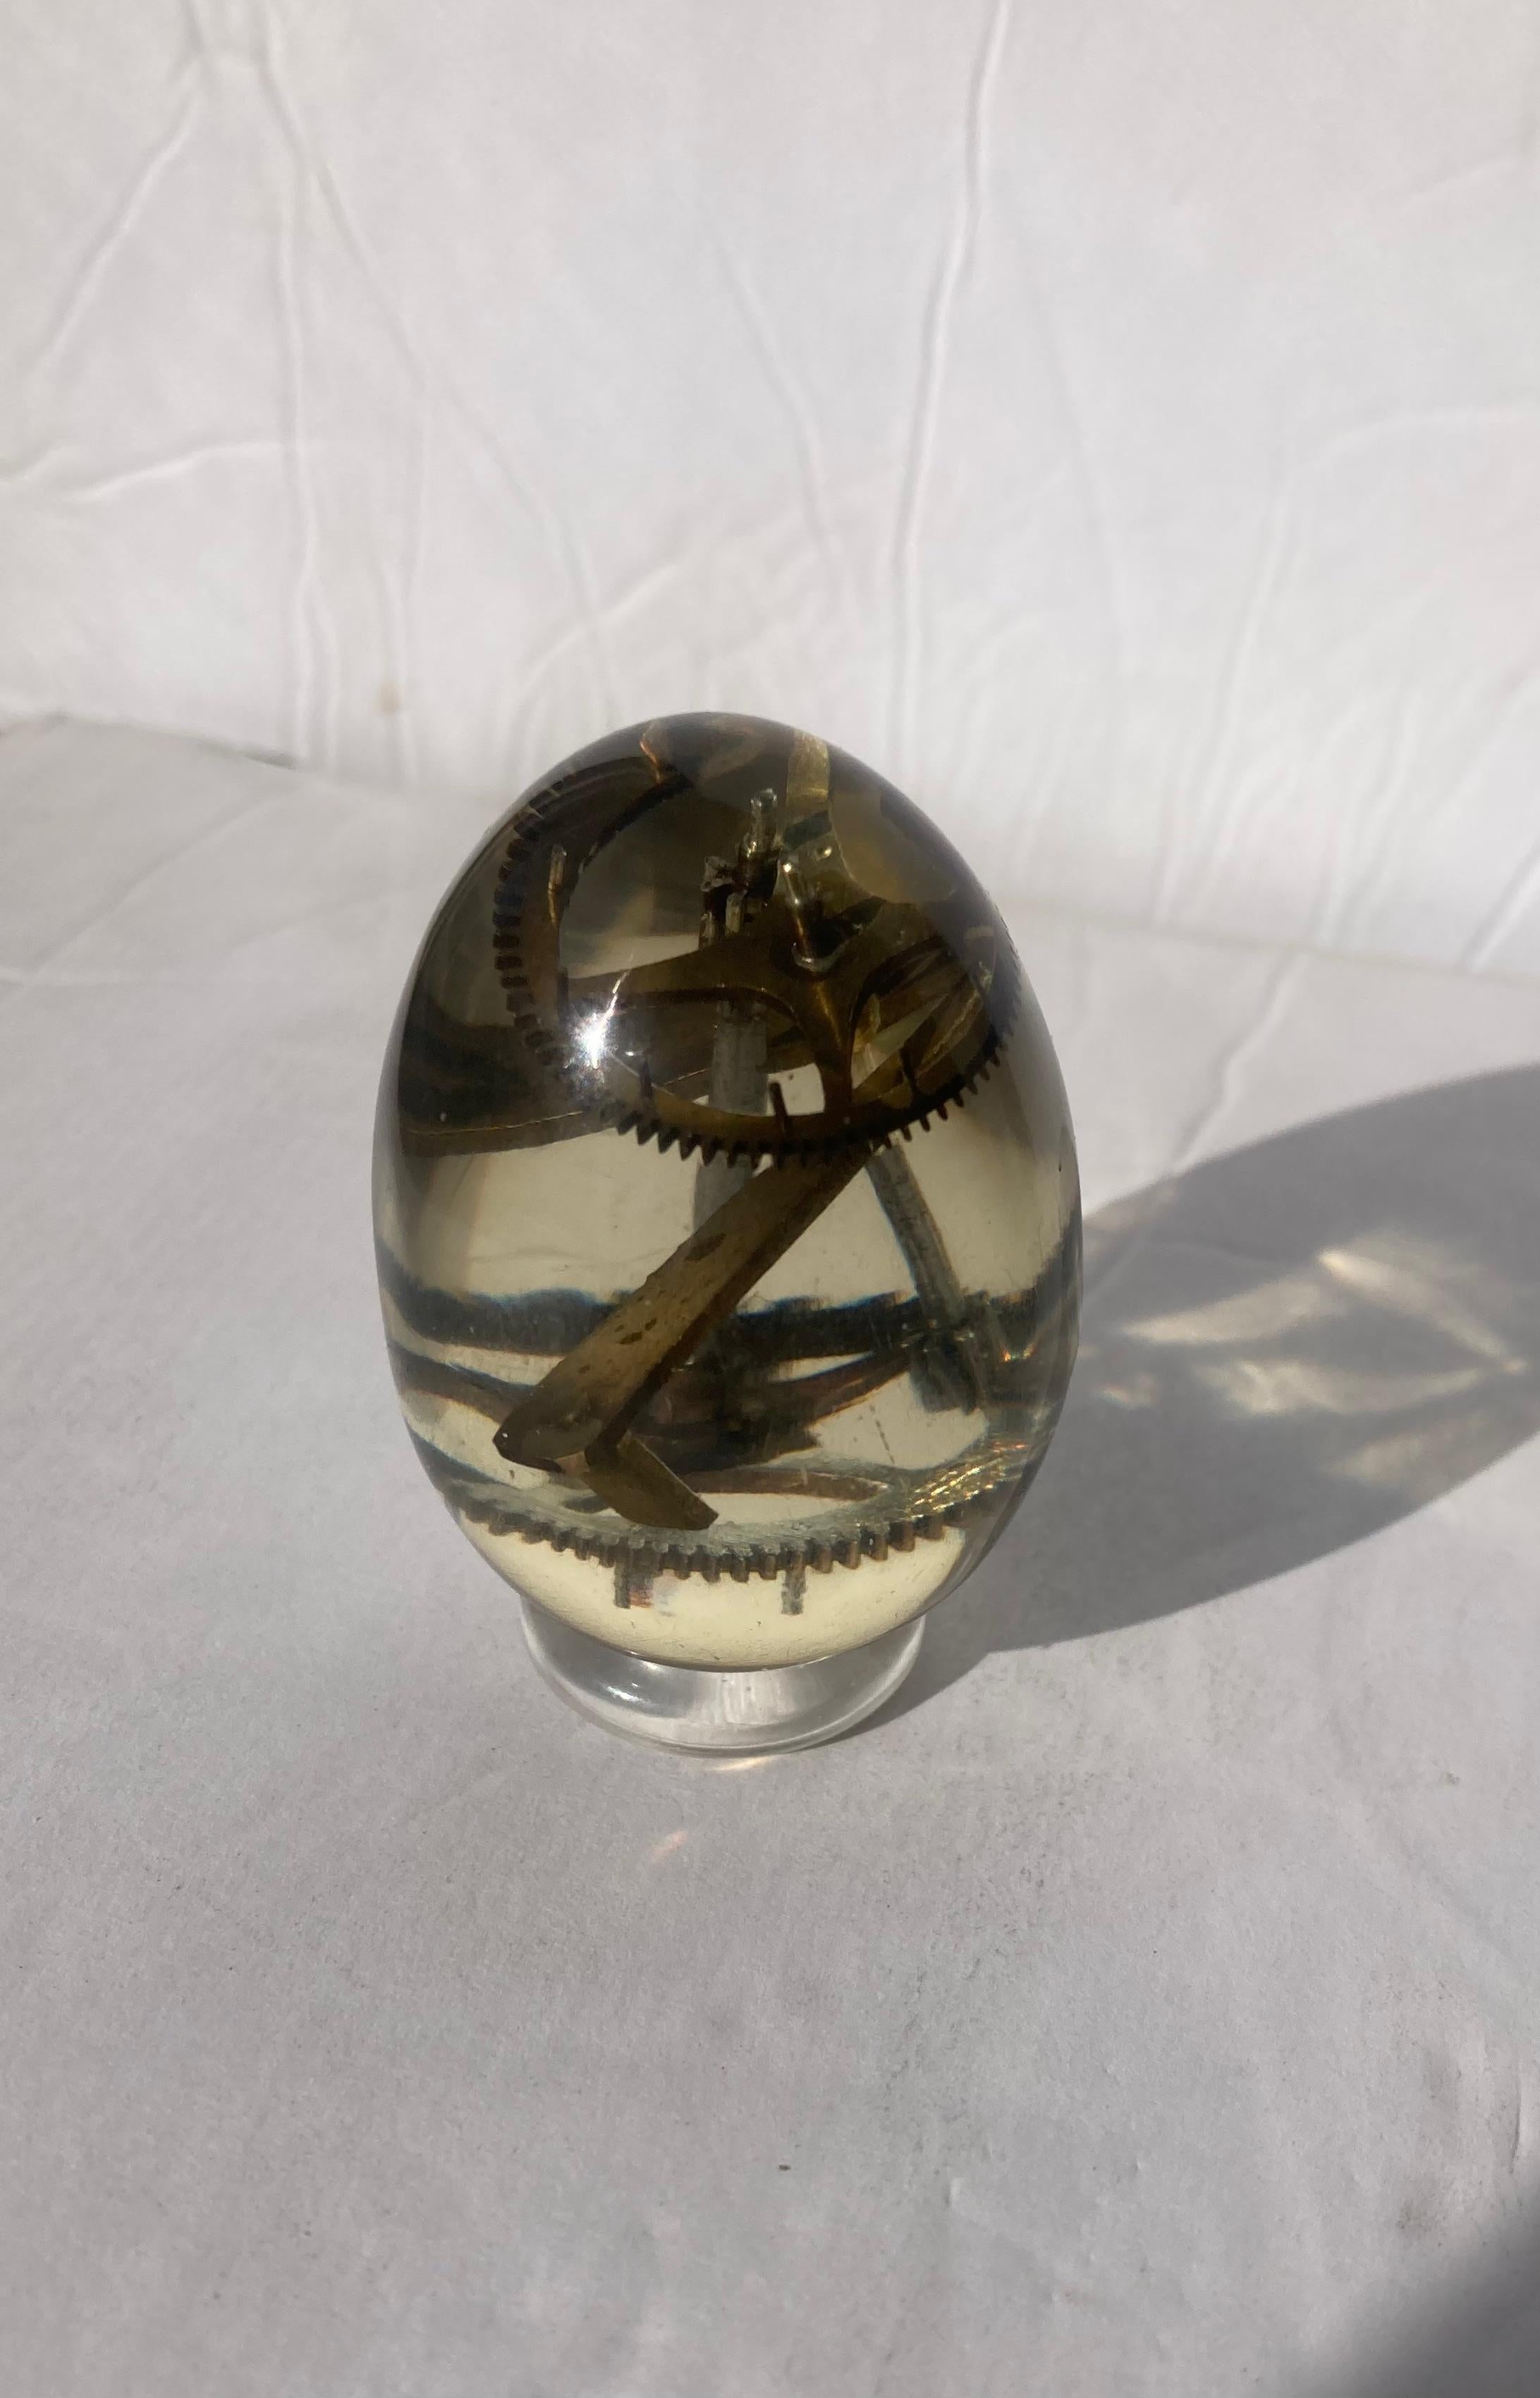 20th Century Resin Egg with Clock Parts on Pierre GIRAUDON  Sculpture /Ornament / Paperweight For Sale